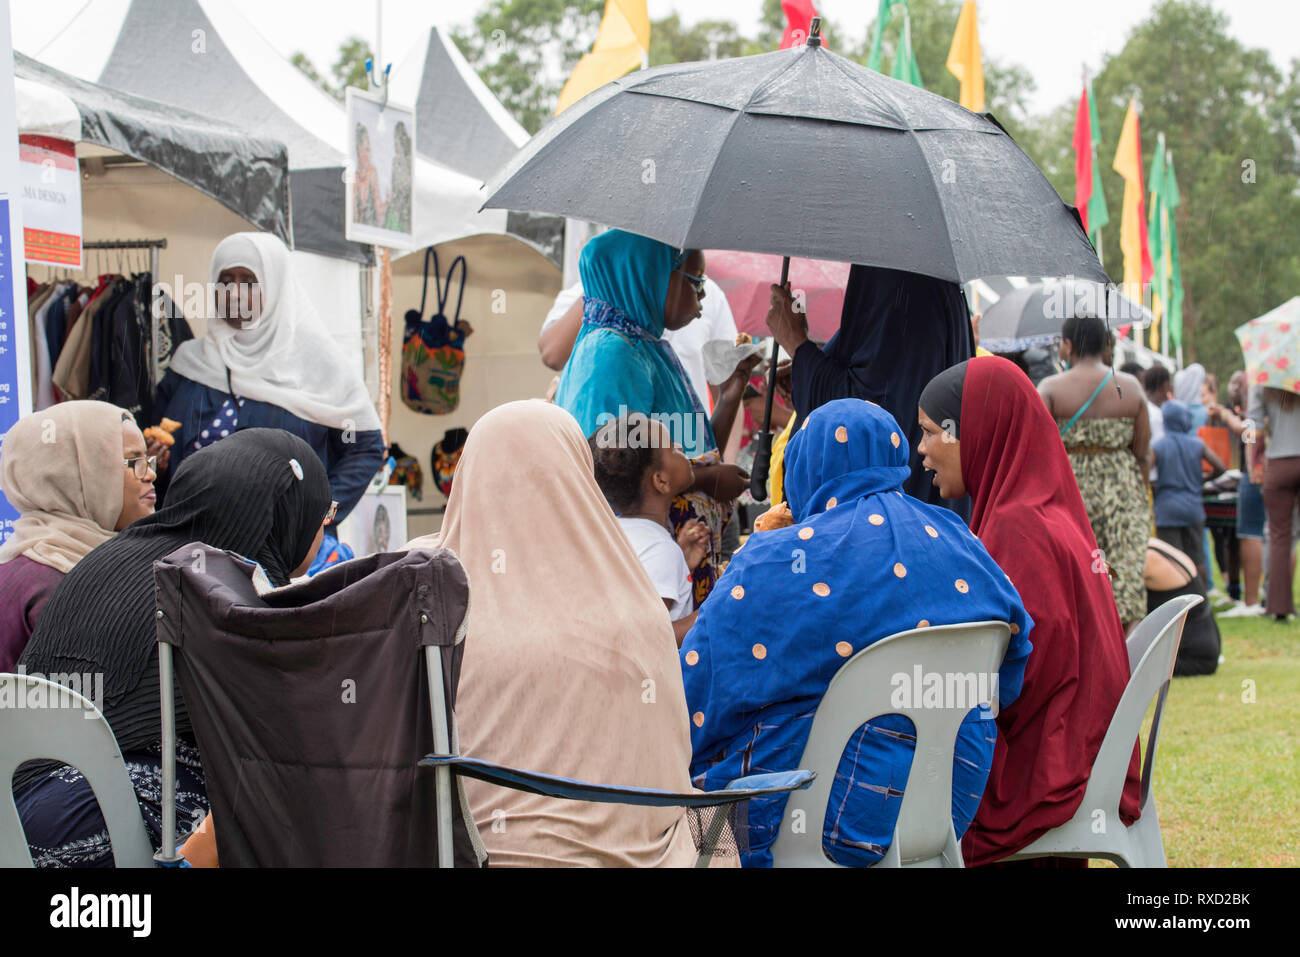 9th Mar 2019, Multicultural Australia was on show today at the Africultures Festival held in Wyatt Park, Lidcombe, Sydney Australia. Stock Photo